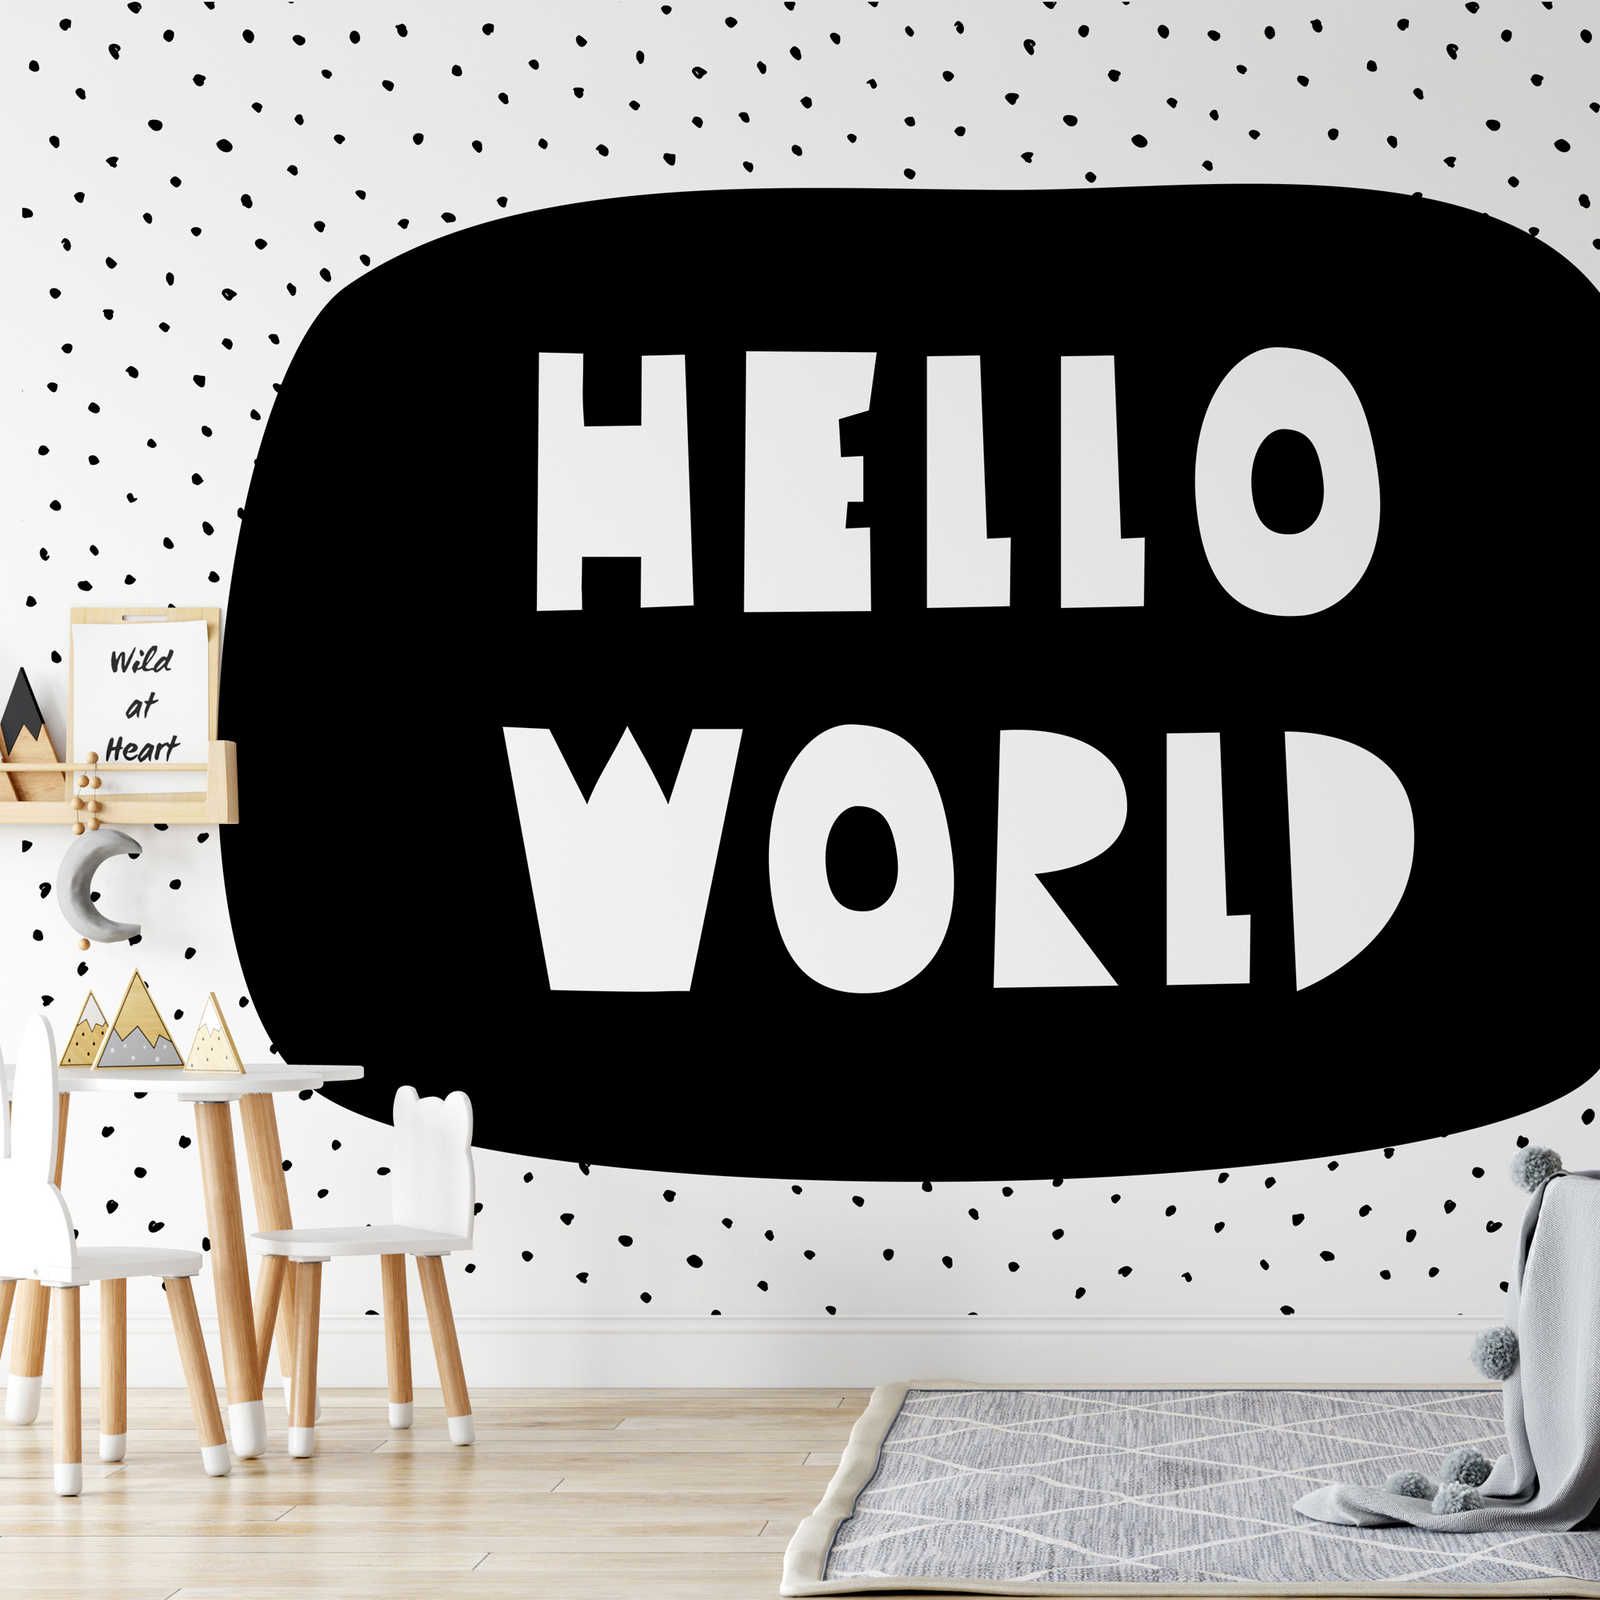 Photo wallpaper for children's room with lettering "Hello World" - Smooth & pearlescent fleece
